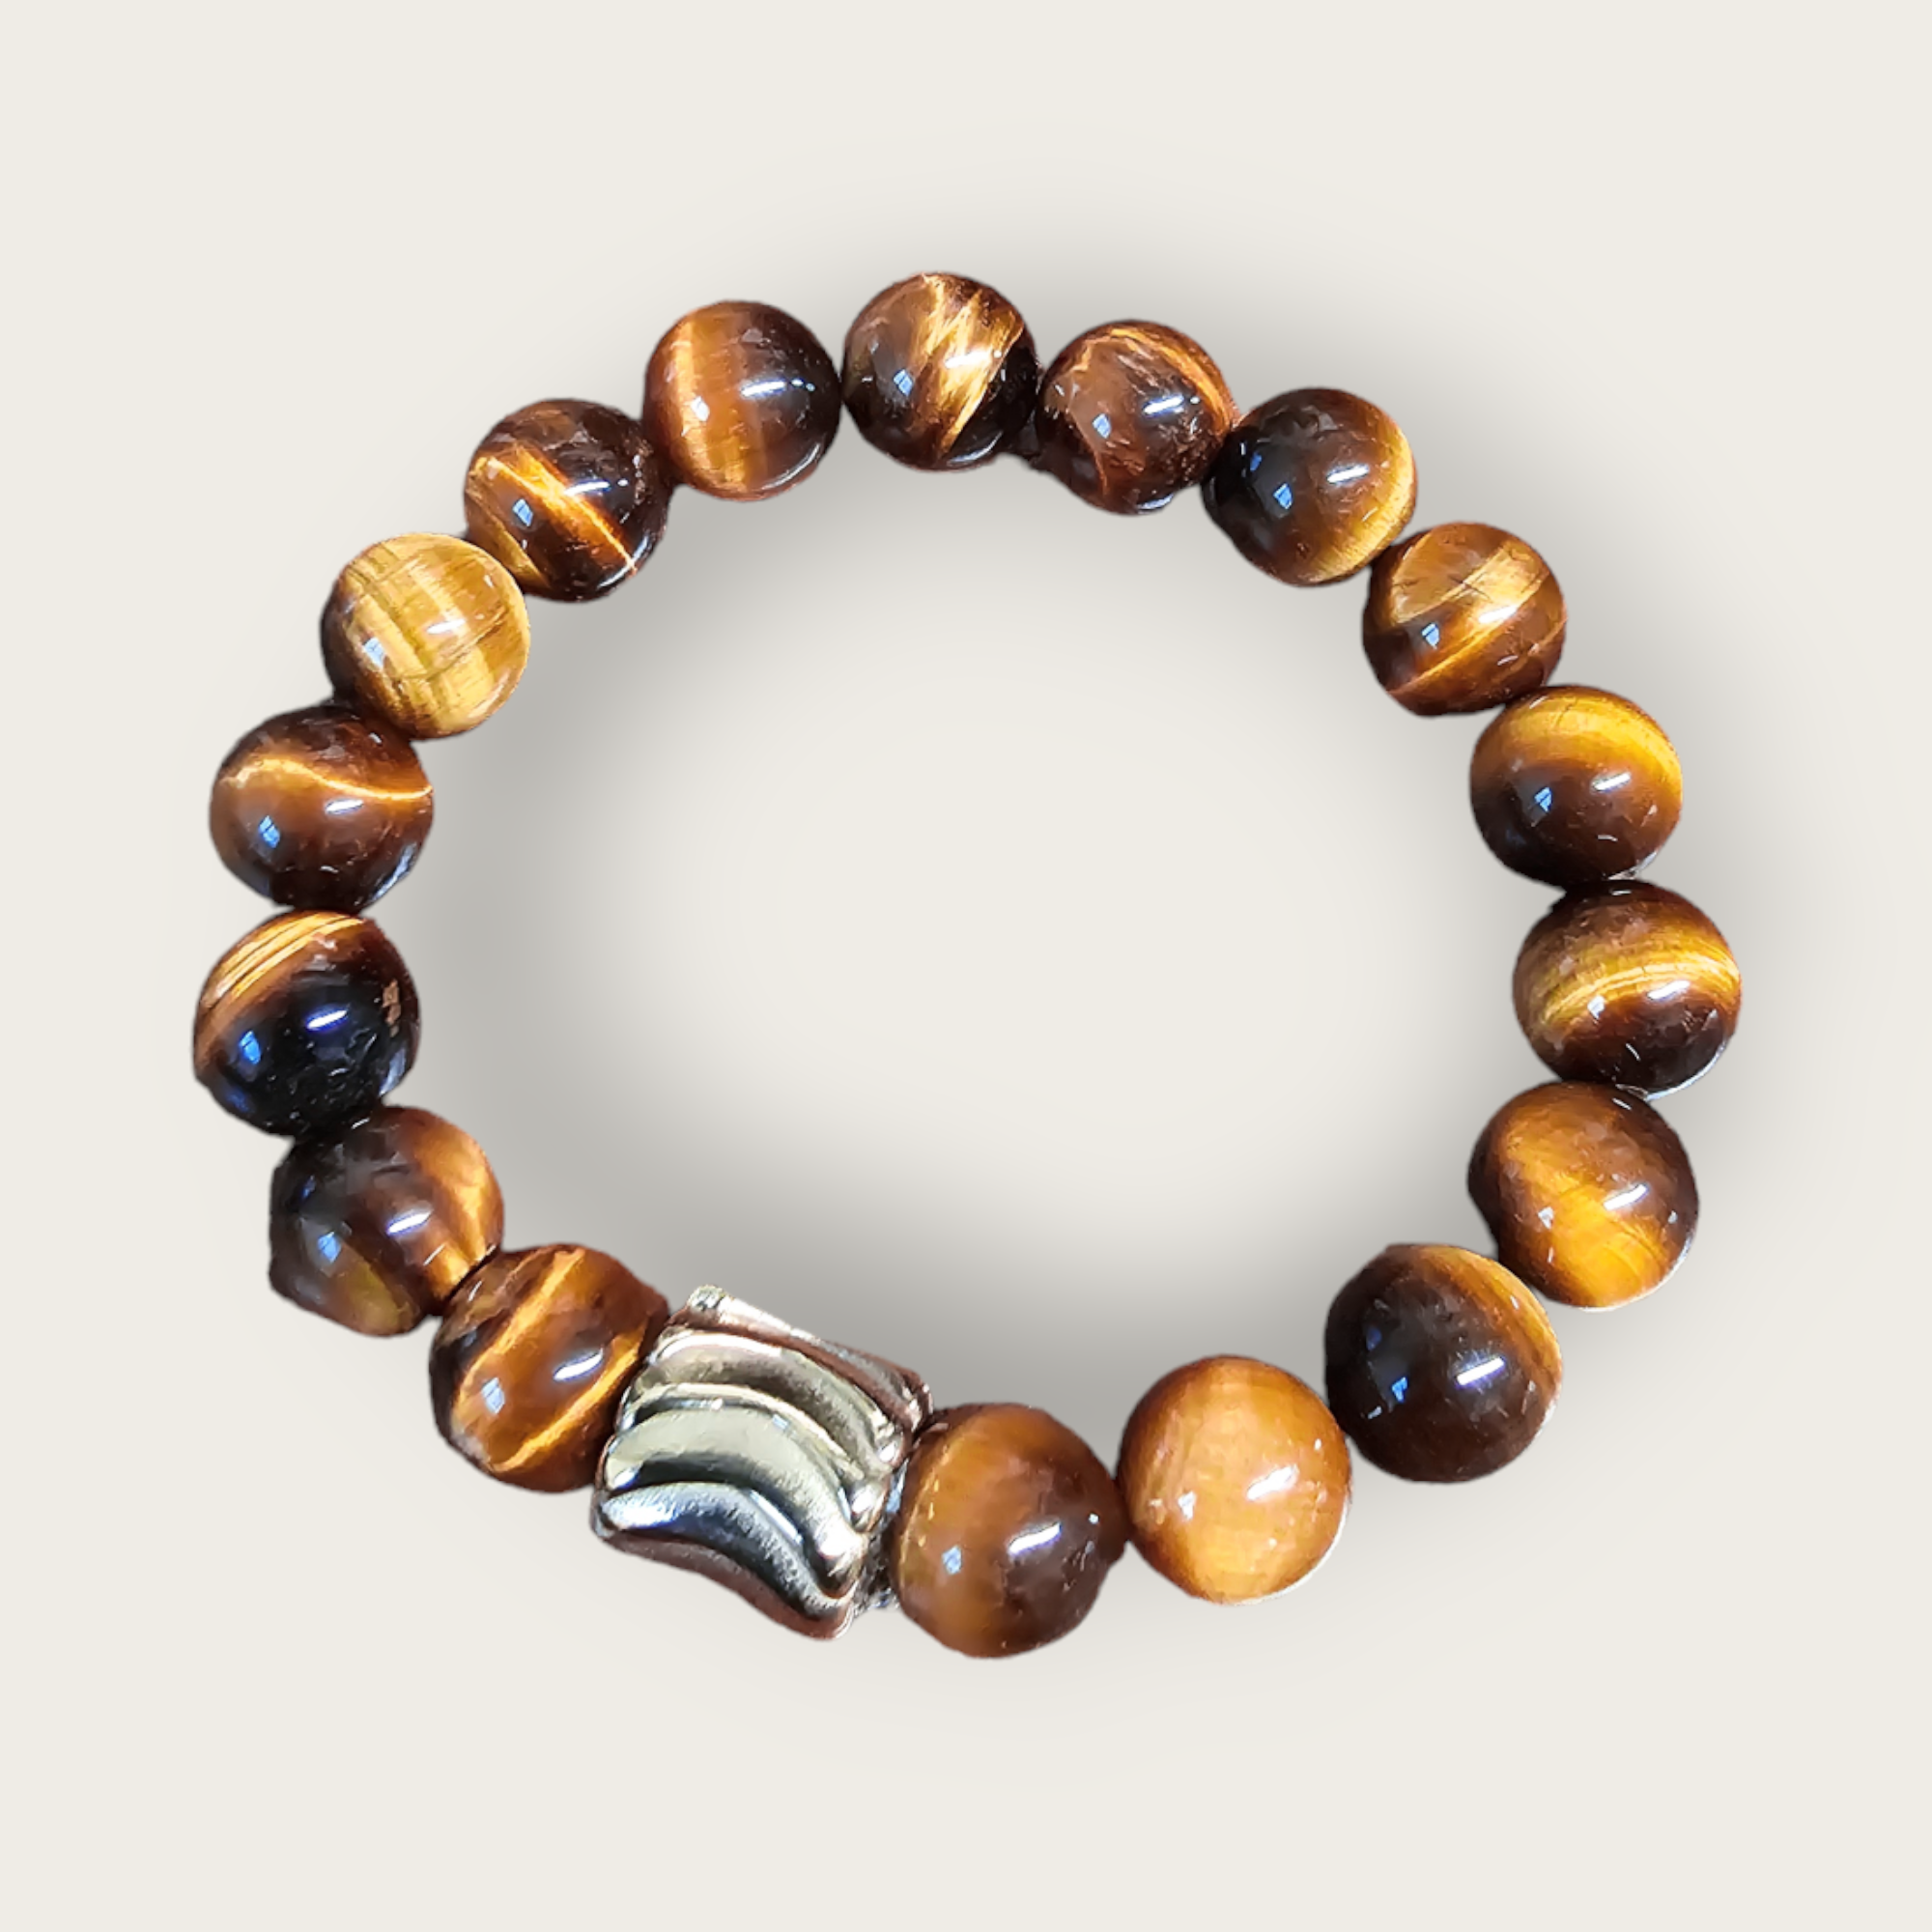 Brown Tigers Eye Bracelet with Gold Stainless Steel Accent Bead